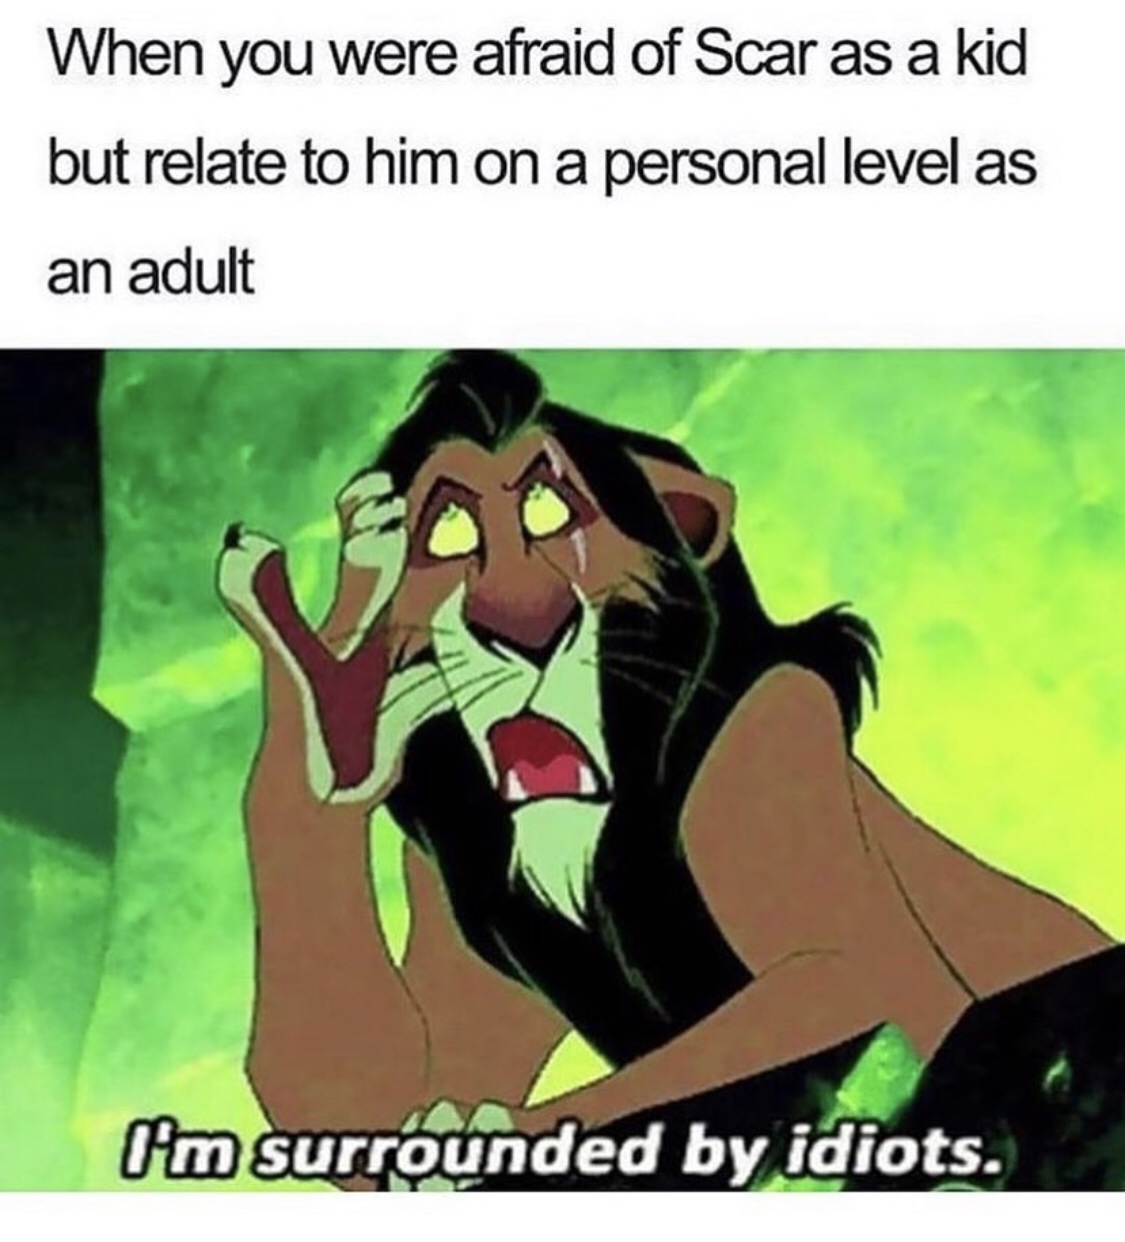 disney memes - When you were afraid of Scar as a kid but relate to him on a personal level as an adult I'm surrounded by idiots.